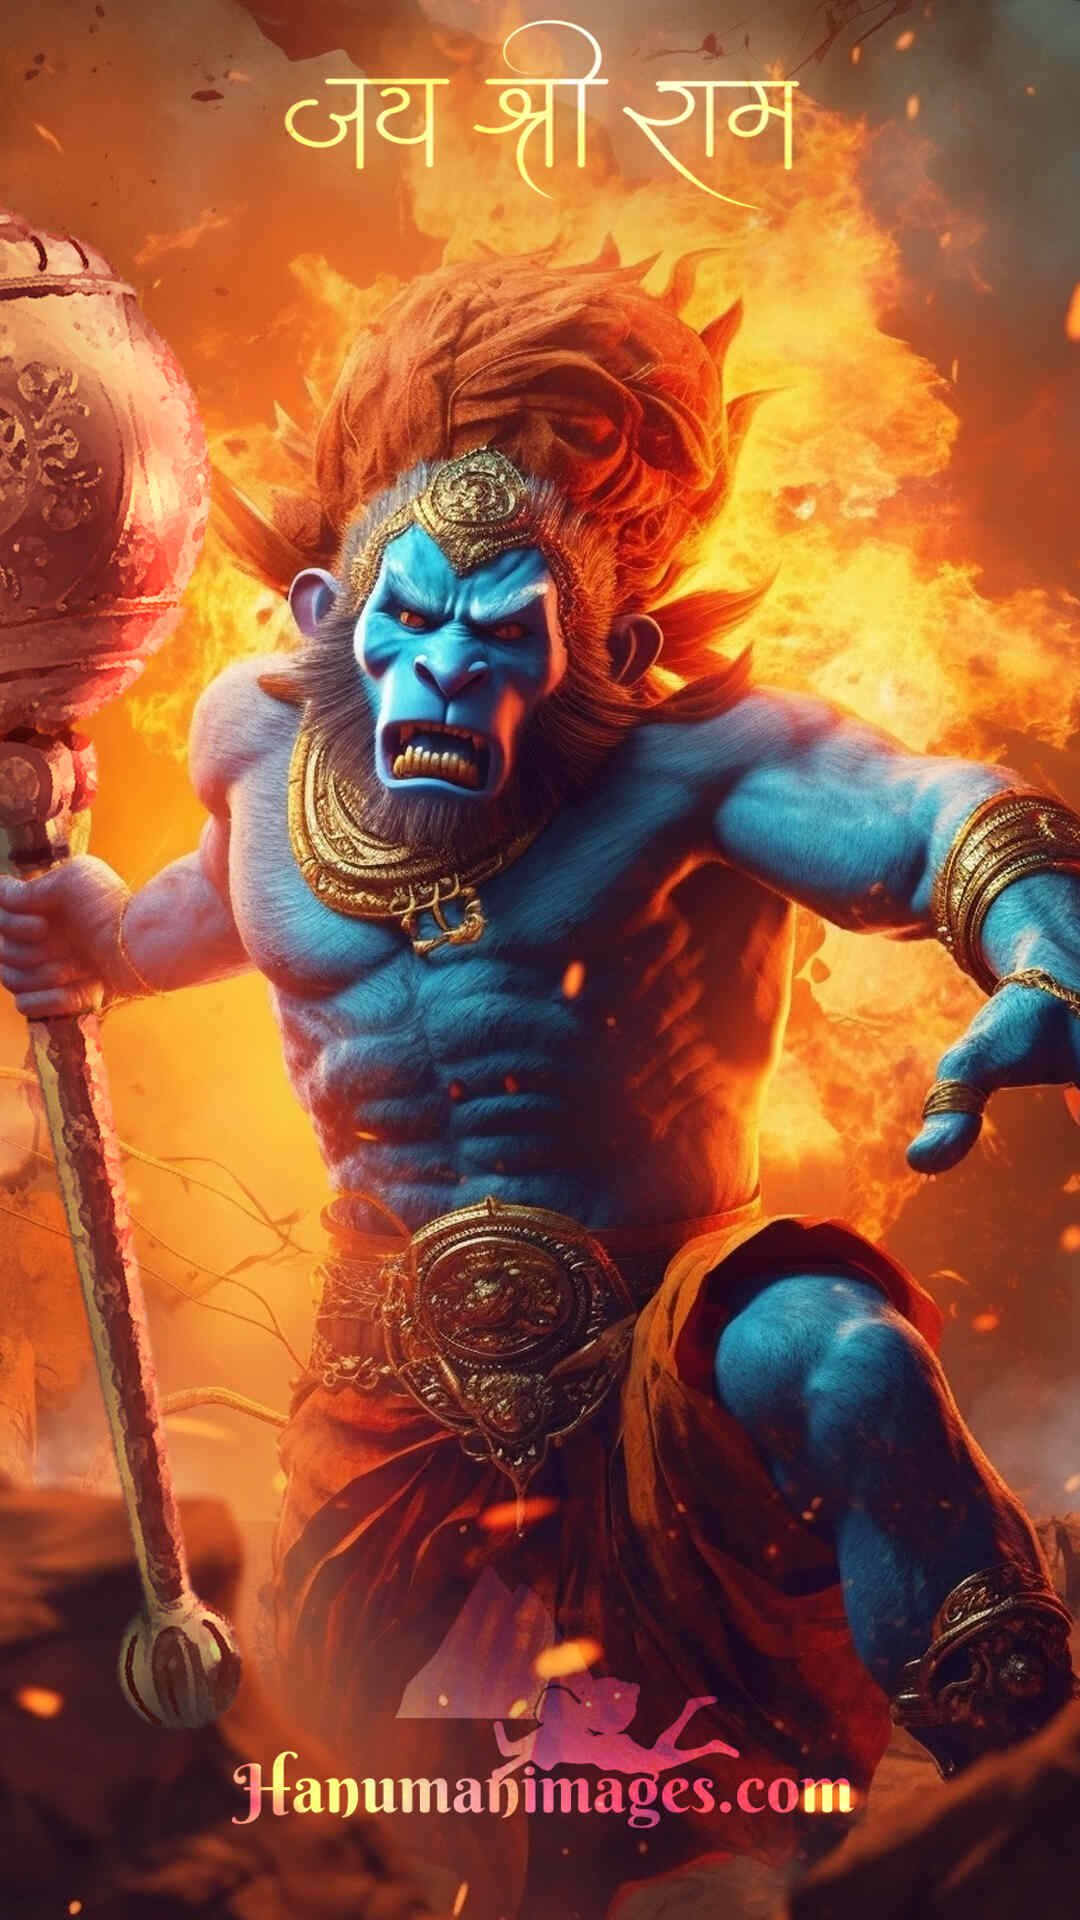 Outstanding Compilation of Full HD Hanuman Wallpapers - Over 999 Images,  Including Full 4K Resolution Options